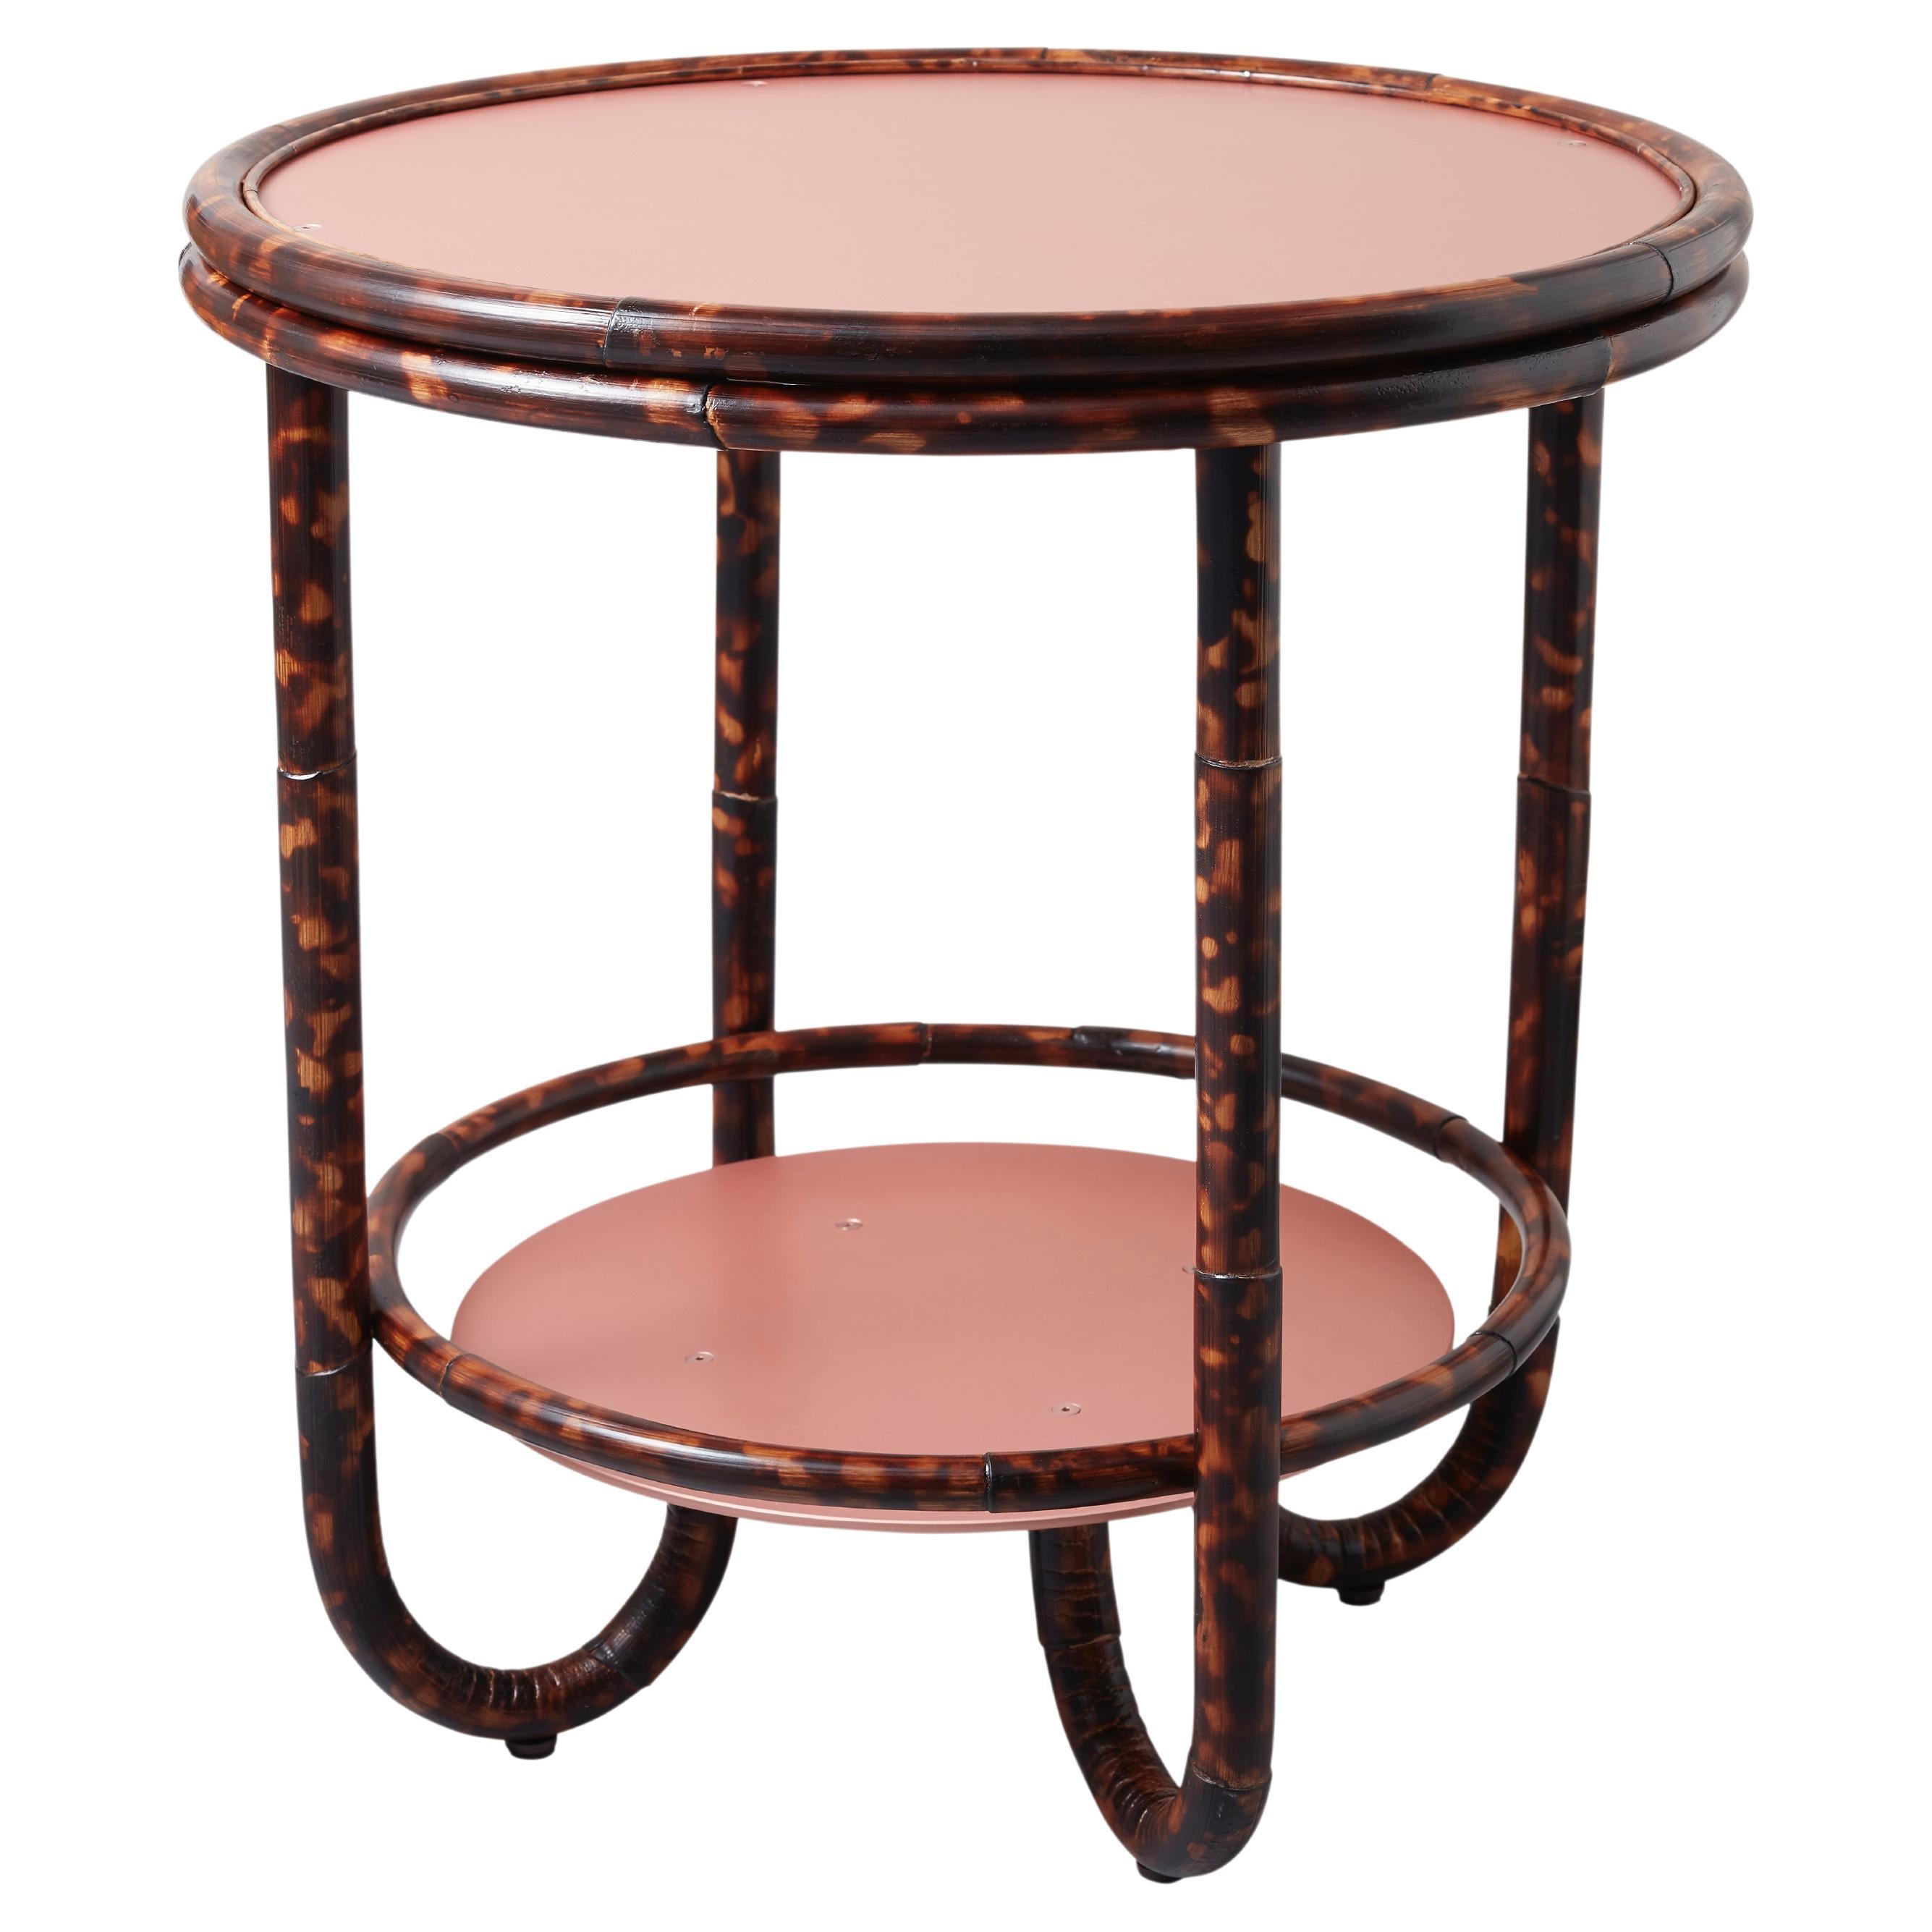 Details about   Vintage French Country Bamboo Wicker Rattan 2-Tier Coffee Cocktail Center Table 